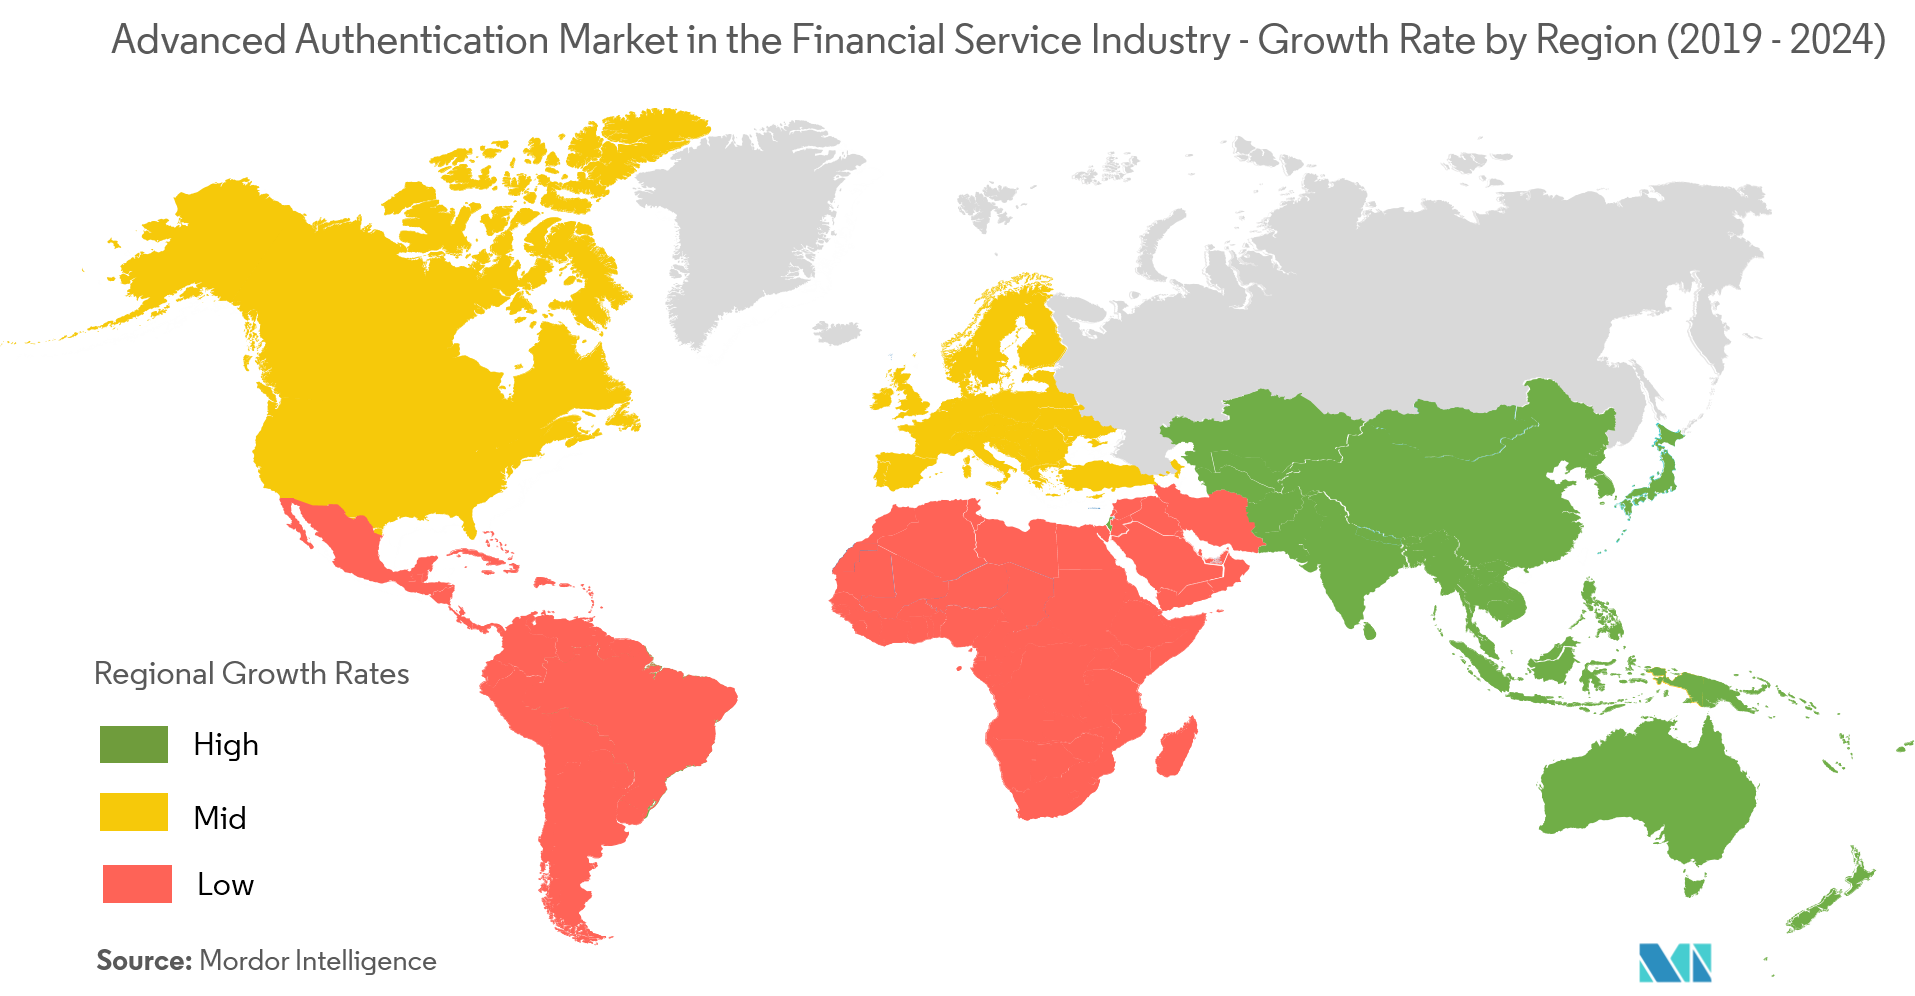 Advanced Authentication Market in the Financial Service Industry - Growth Rate by Region (2019-2024)